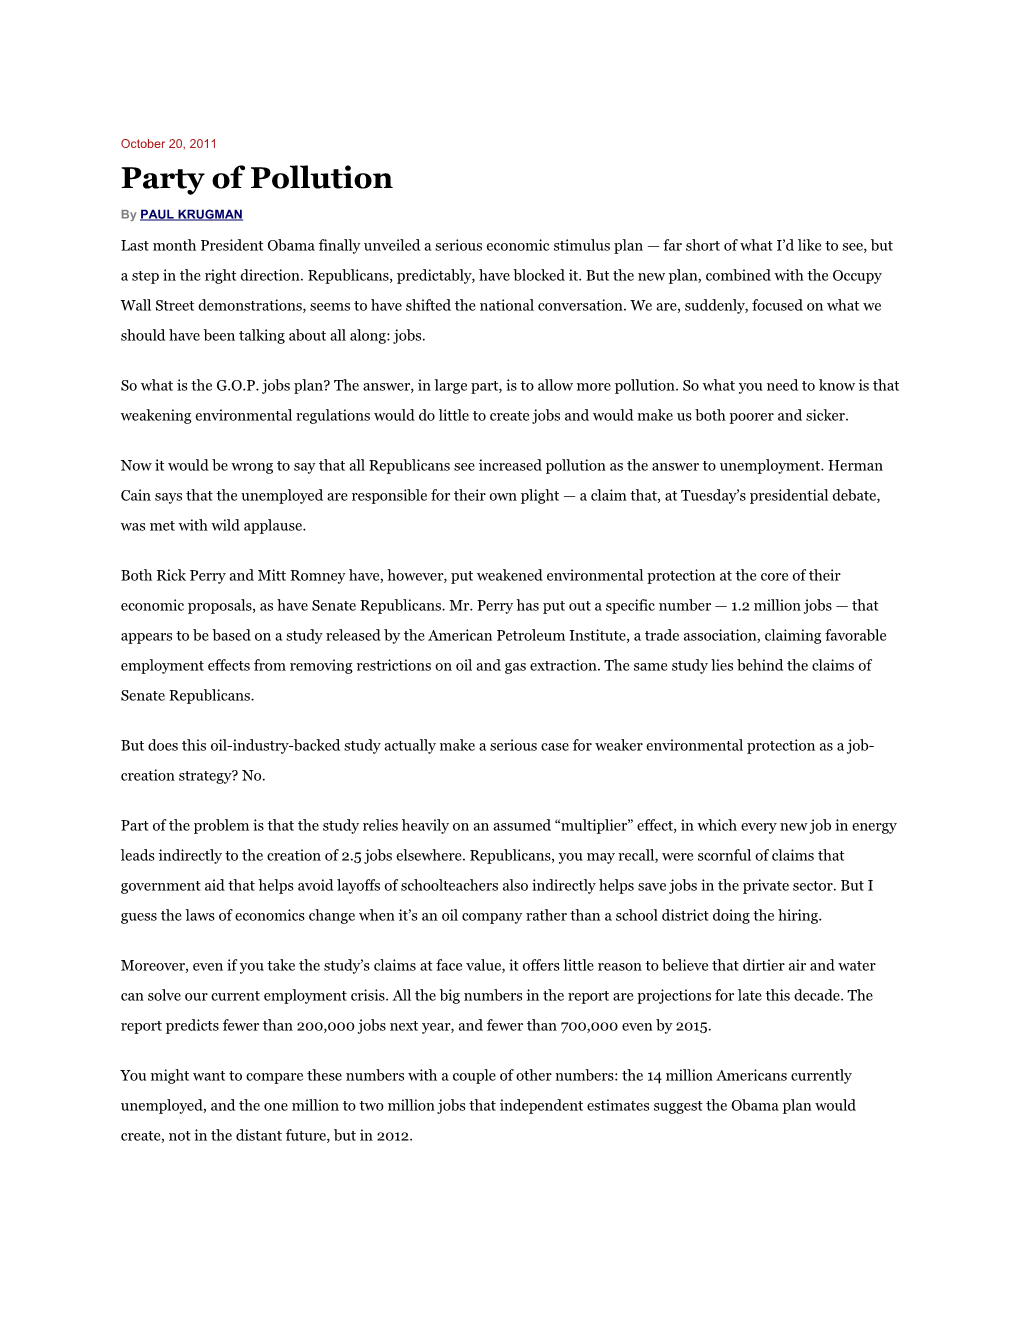 Party of Pollution